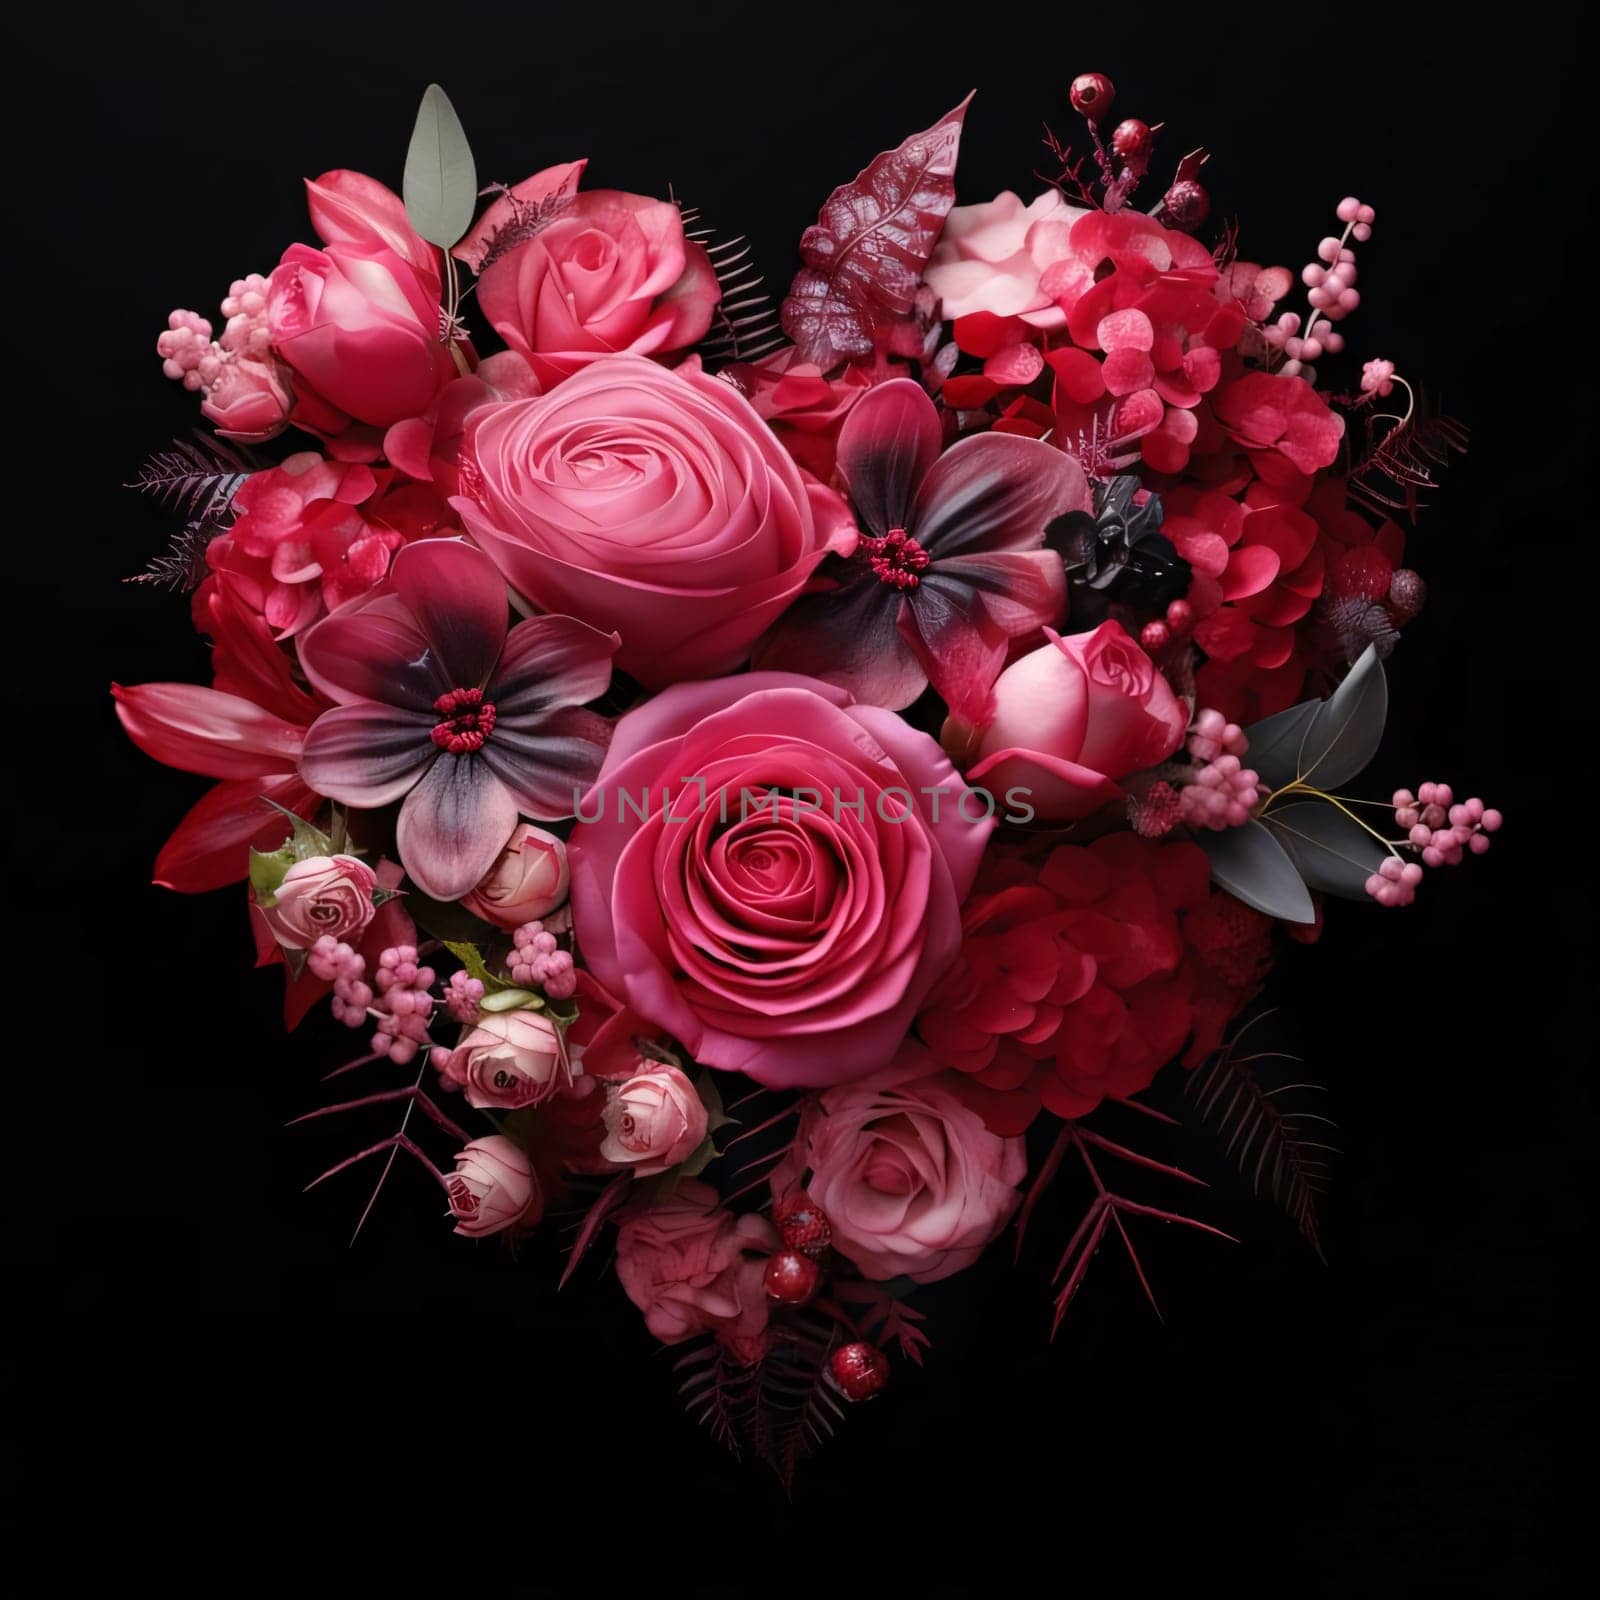 Bouquet of red pink flowers forming a heart black background. Flowering flowers, a symbol of spring, new life. A joyful time of nature waking up to life.